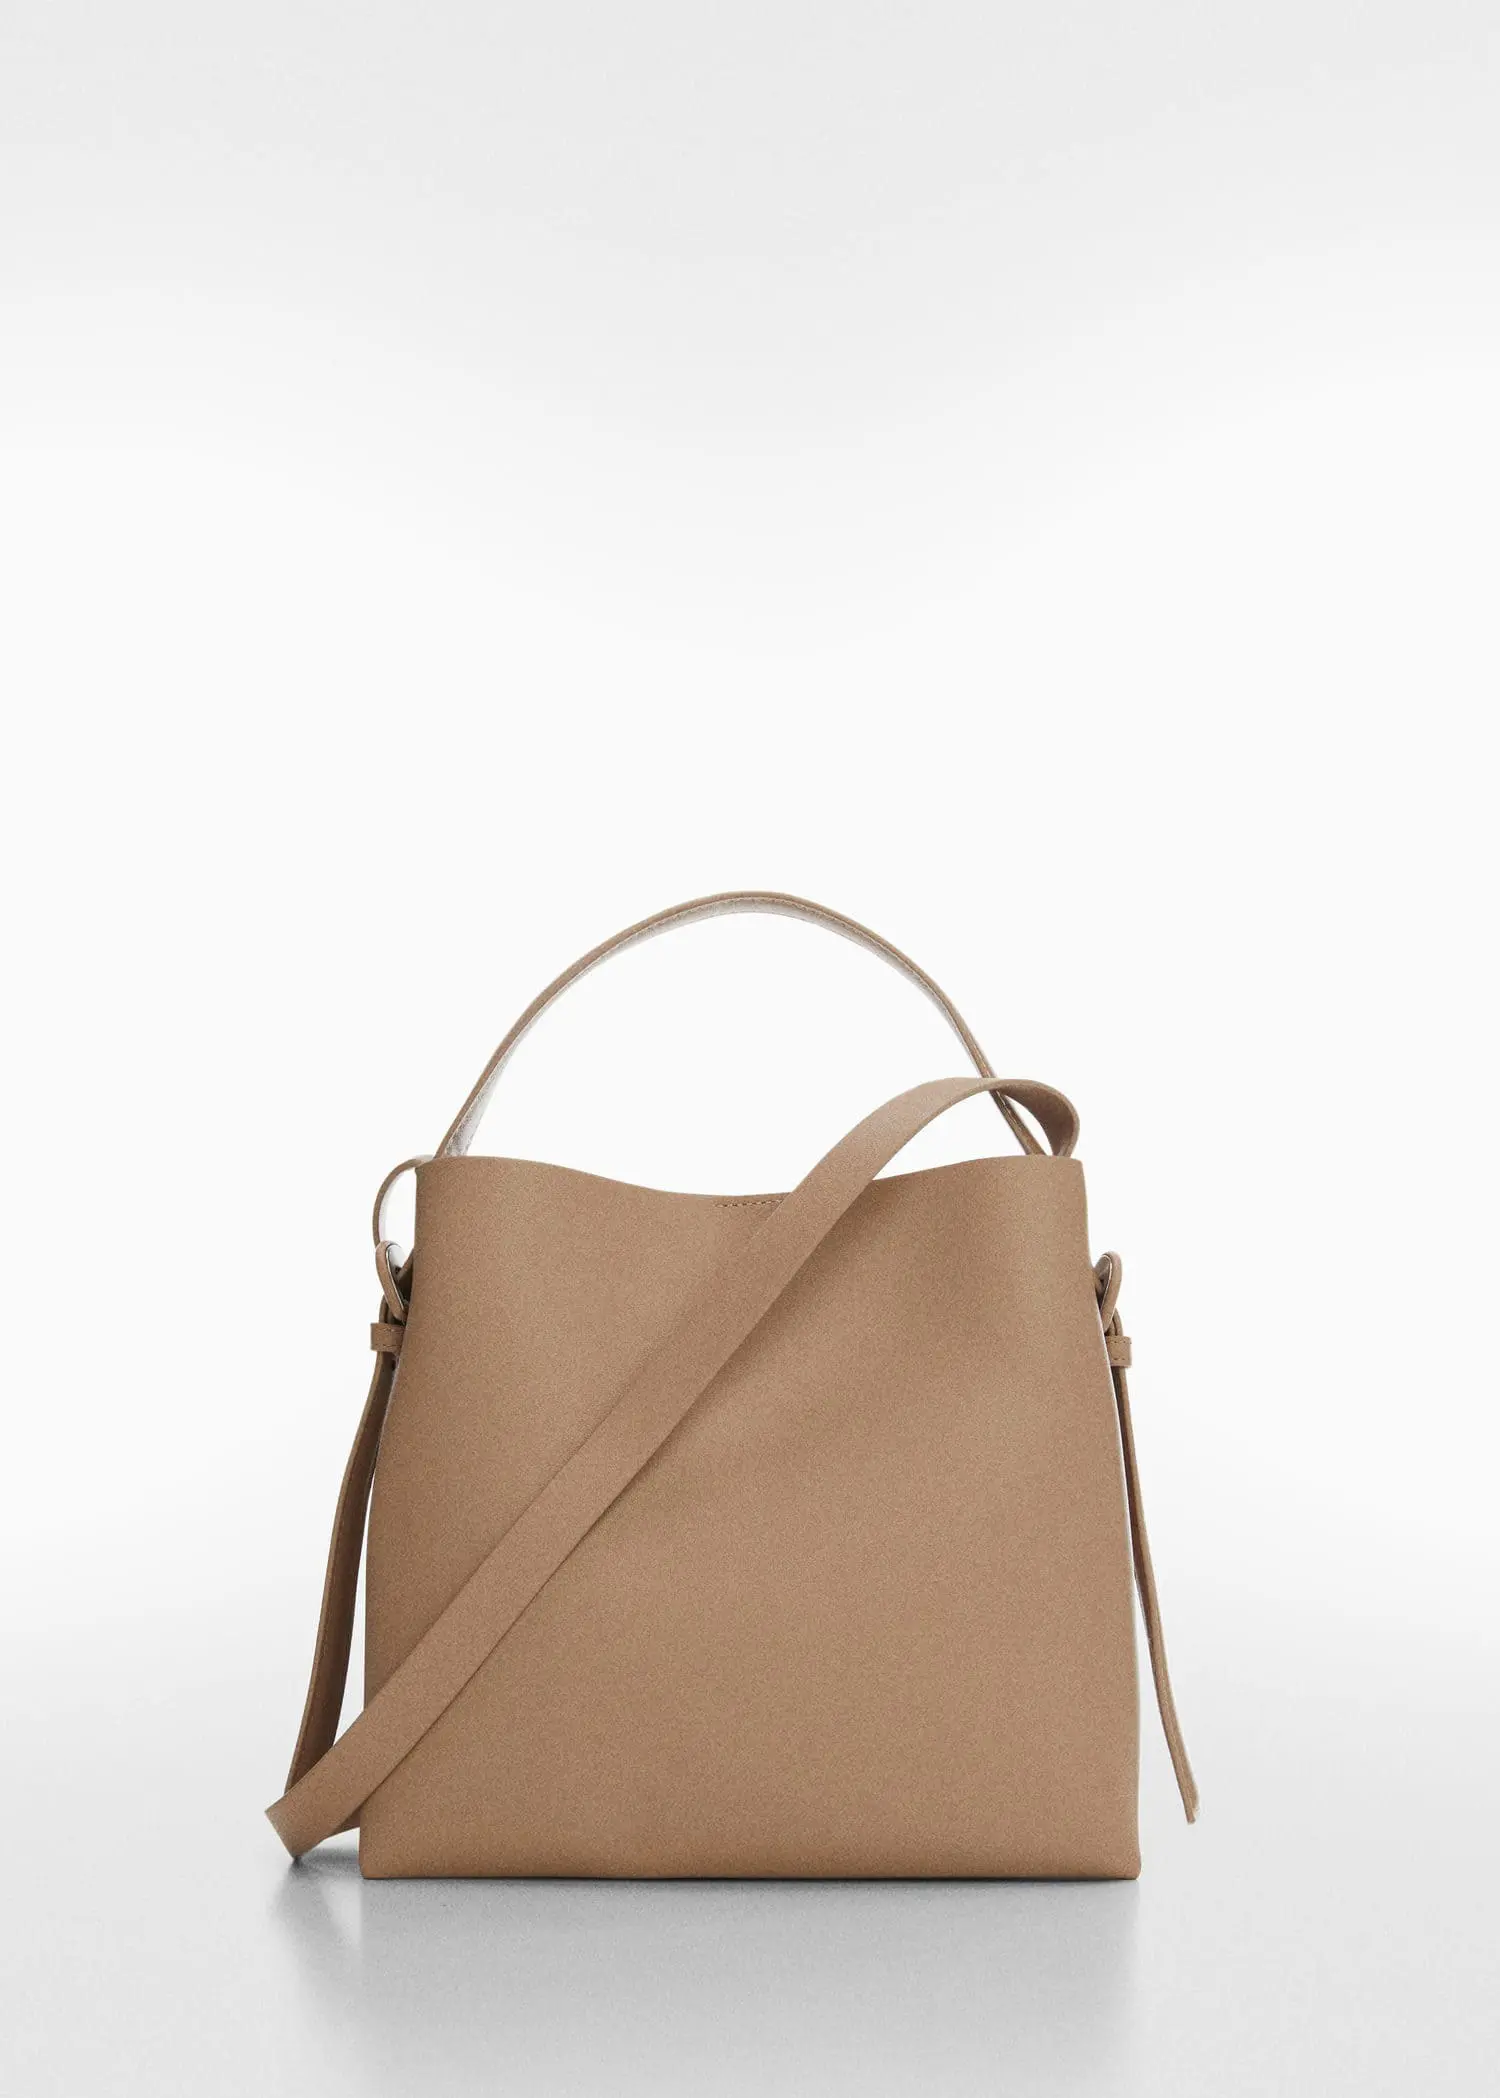 Mango Shopper bag with buckle. a tan bag is shown with a strap. 